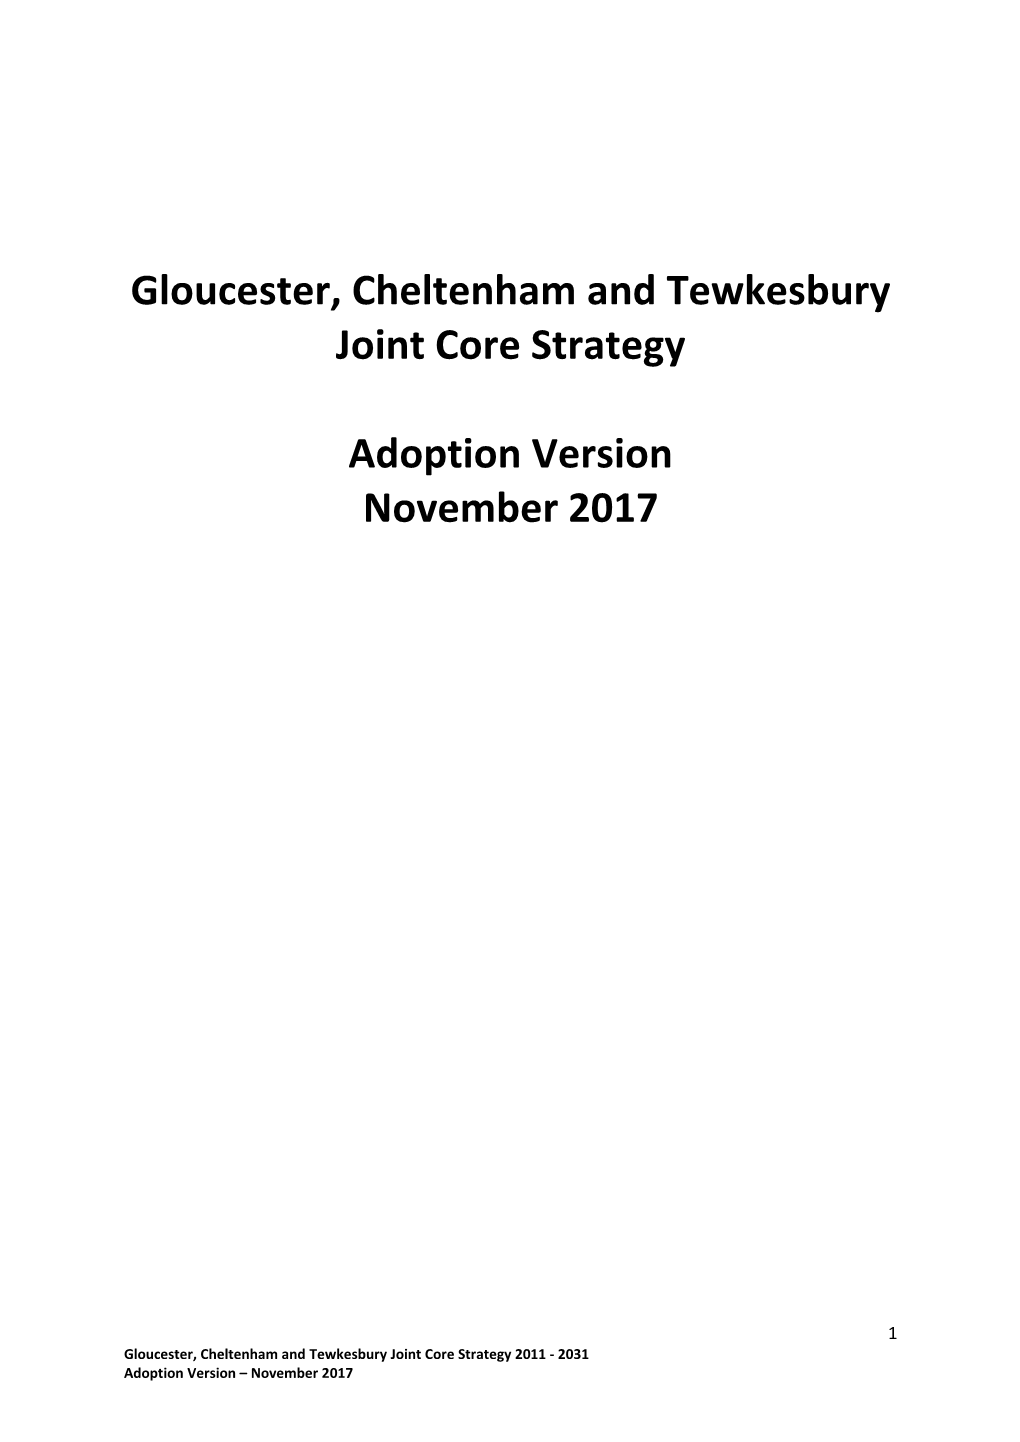 Gloucester, Cheltenham and Tewkesbury Joint Core Strategy